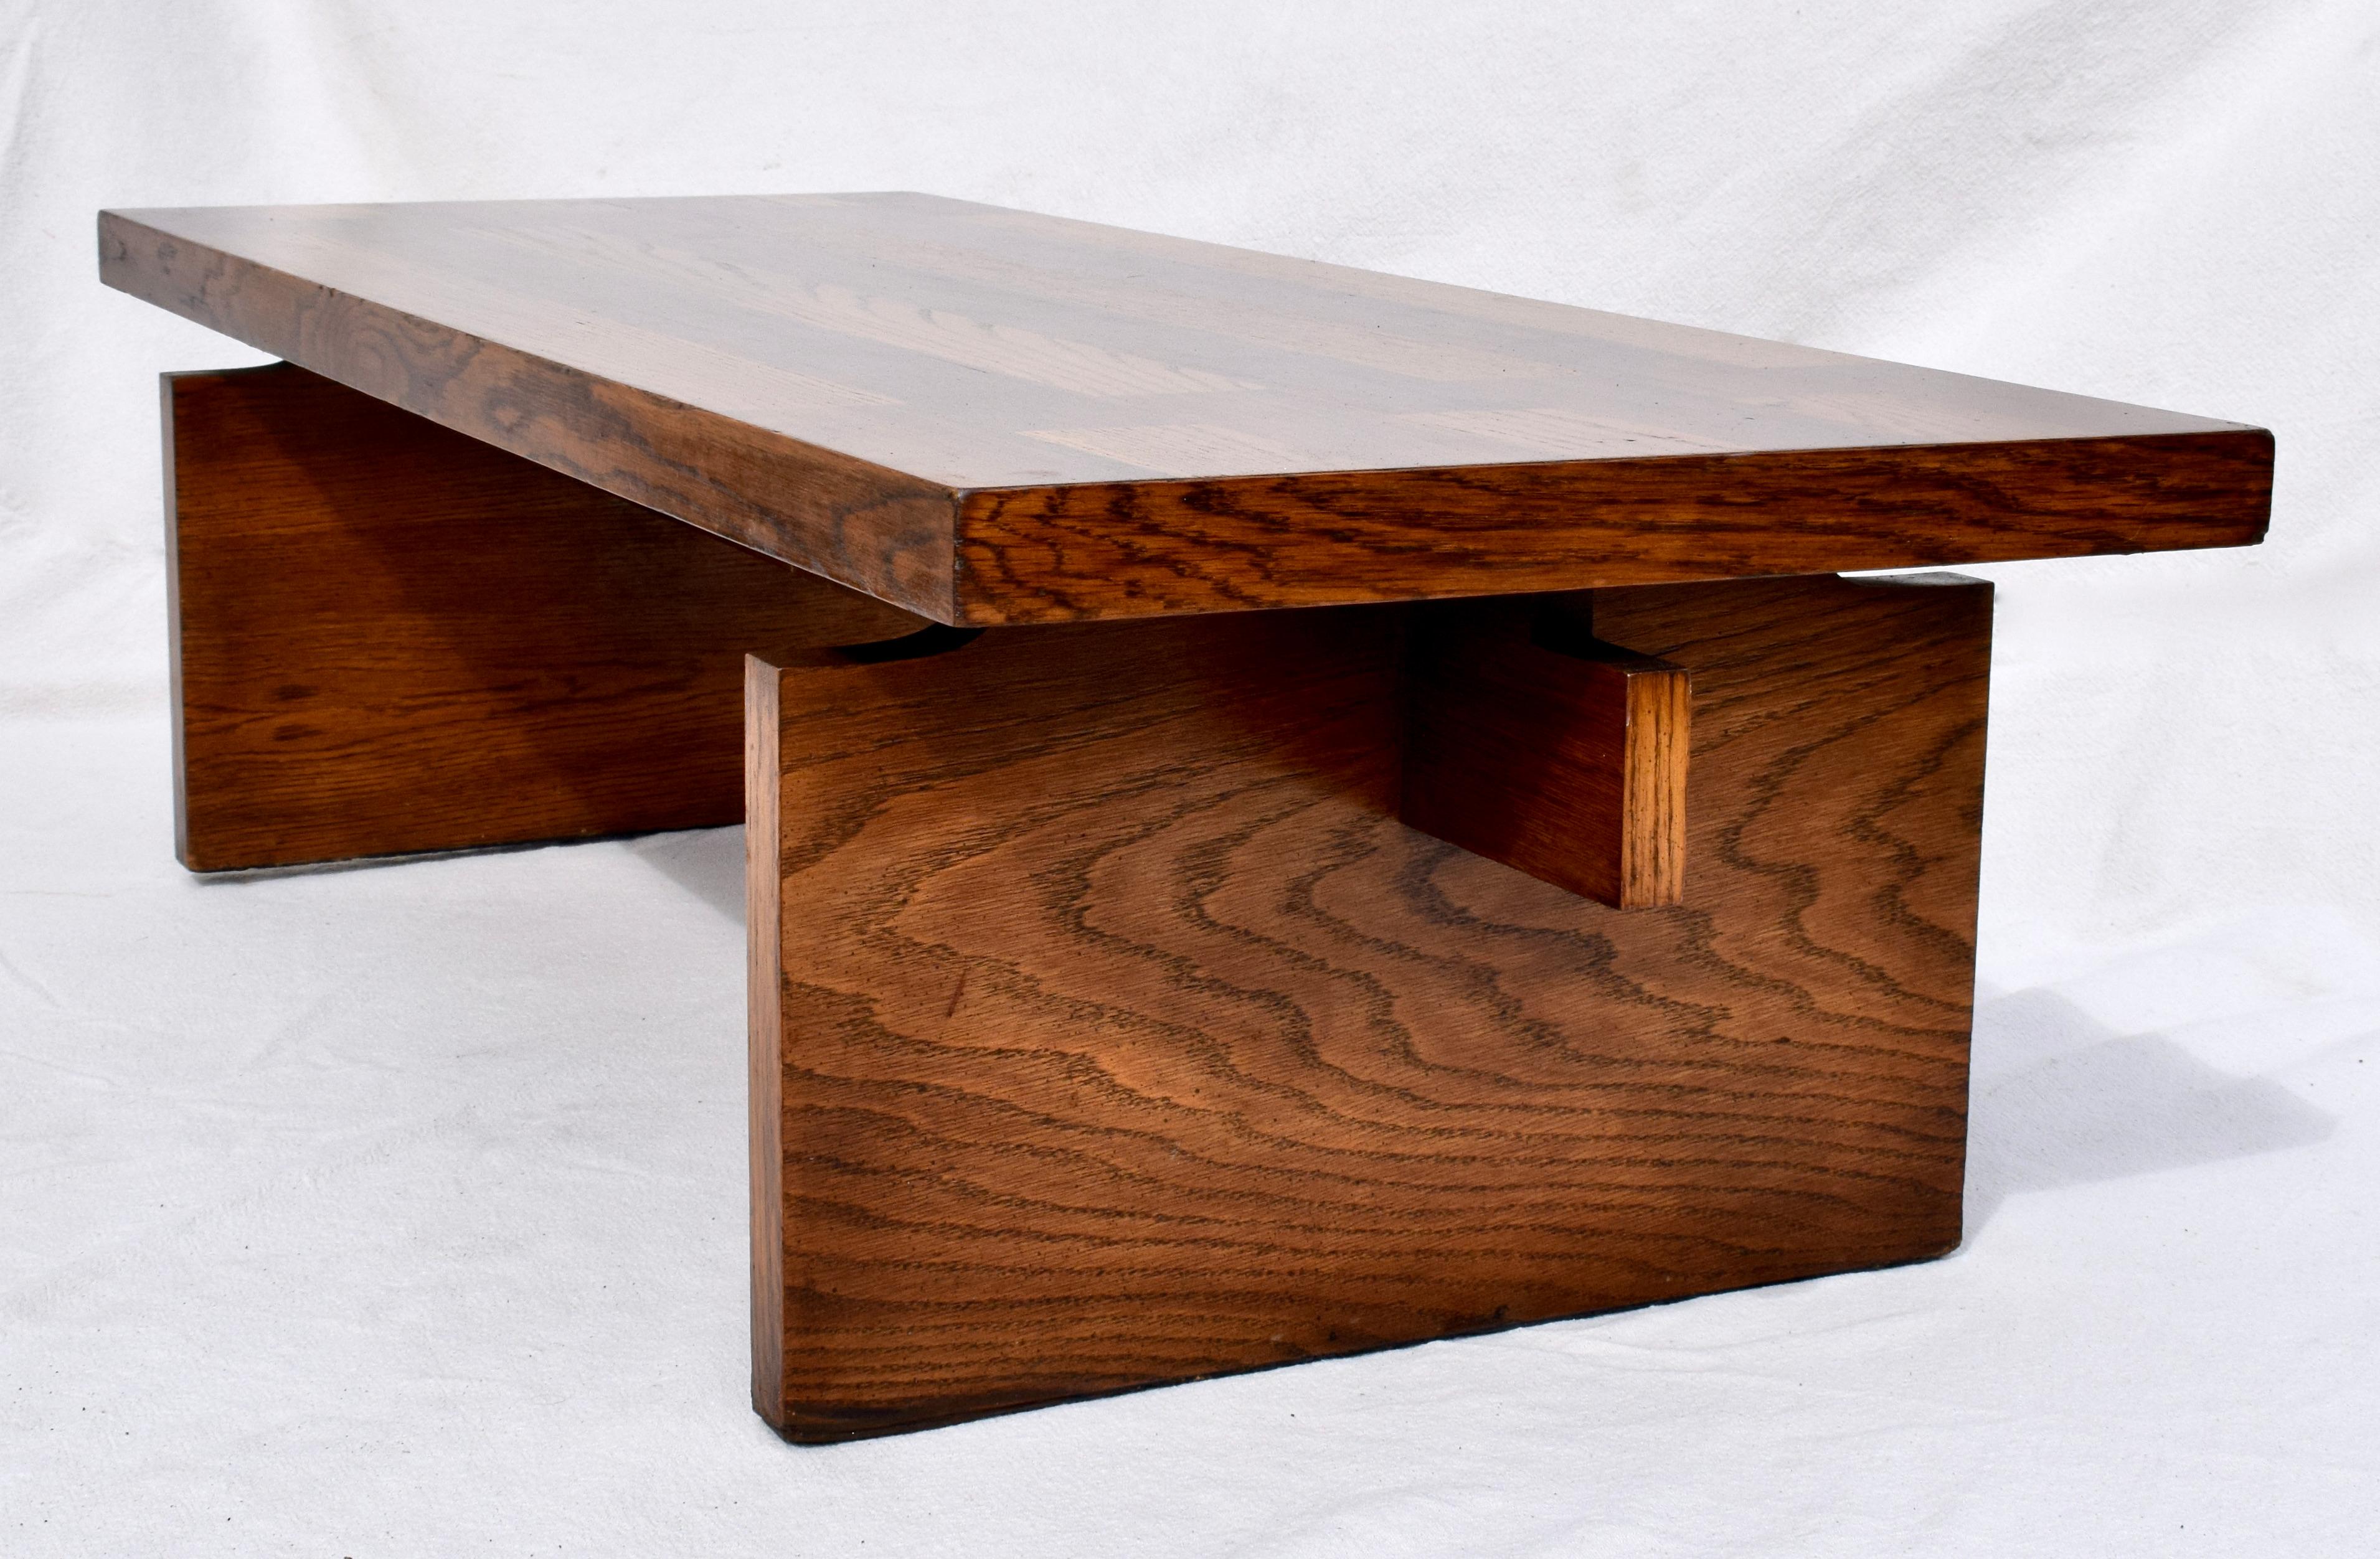 An impressive Mid-Century Modern coffee table of fiery oak & walnut woods by Lane furniture. We love the simple yet distinct Arts & Crafts design elements making this substantial table suitable for use in a variety of settings.